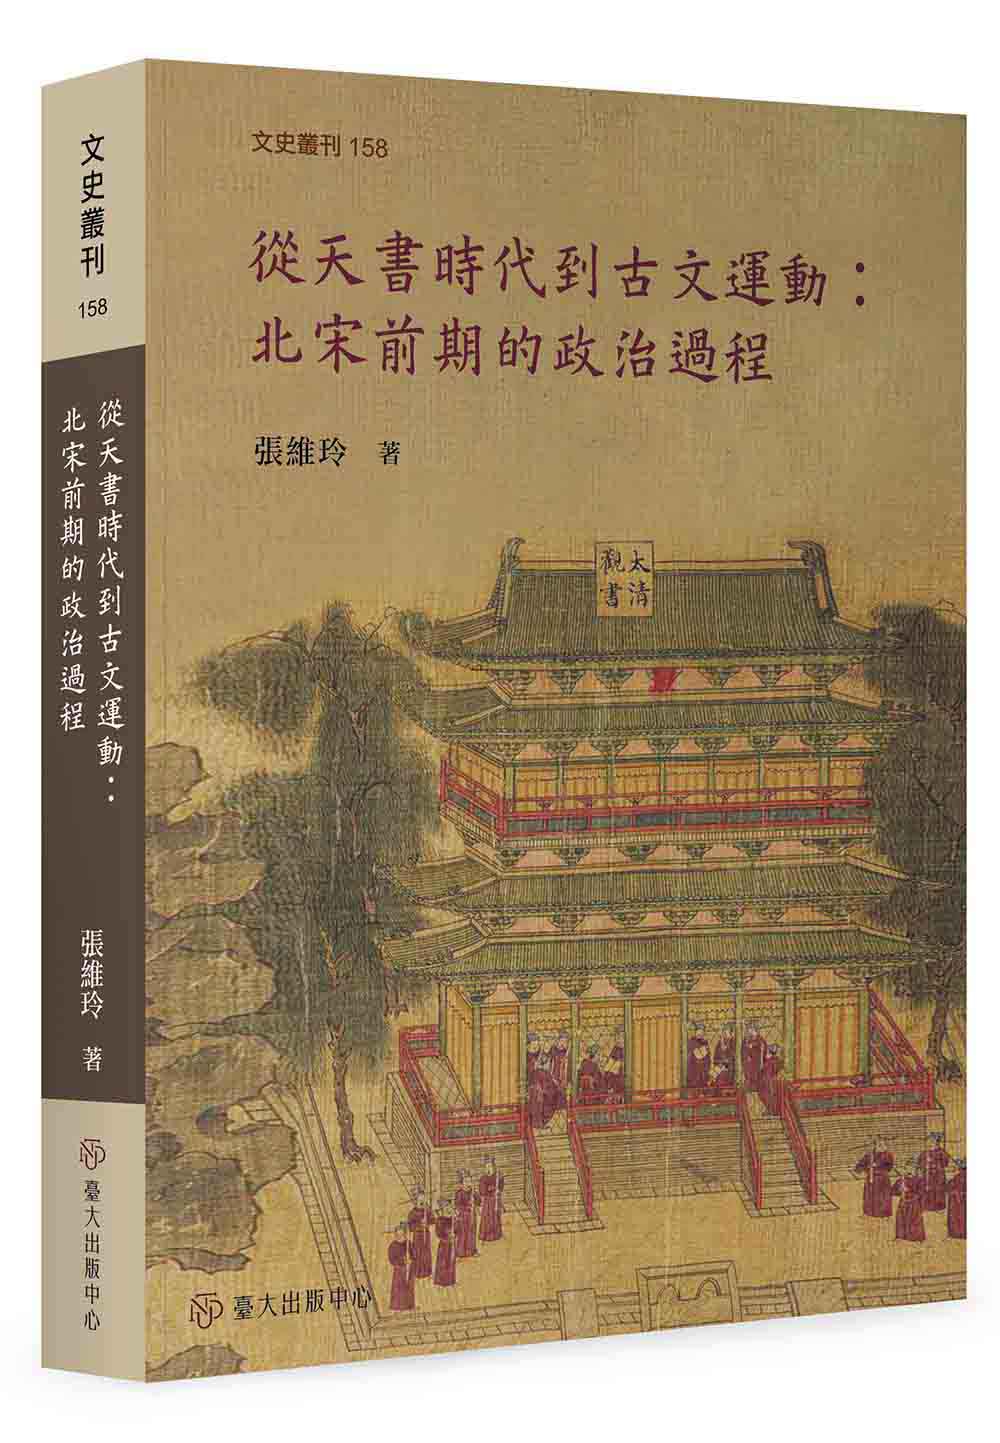 From the “Heavenly Texts” Period to the Guwen Movement: The Political Process of the Early Northern Song Dynasty